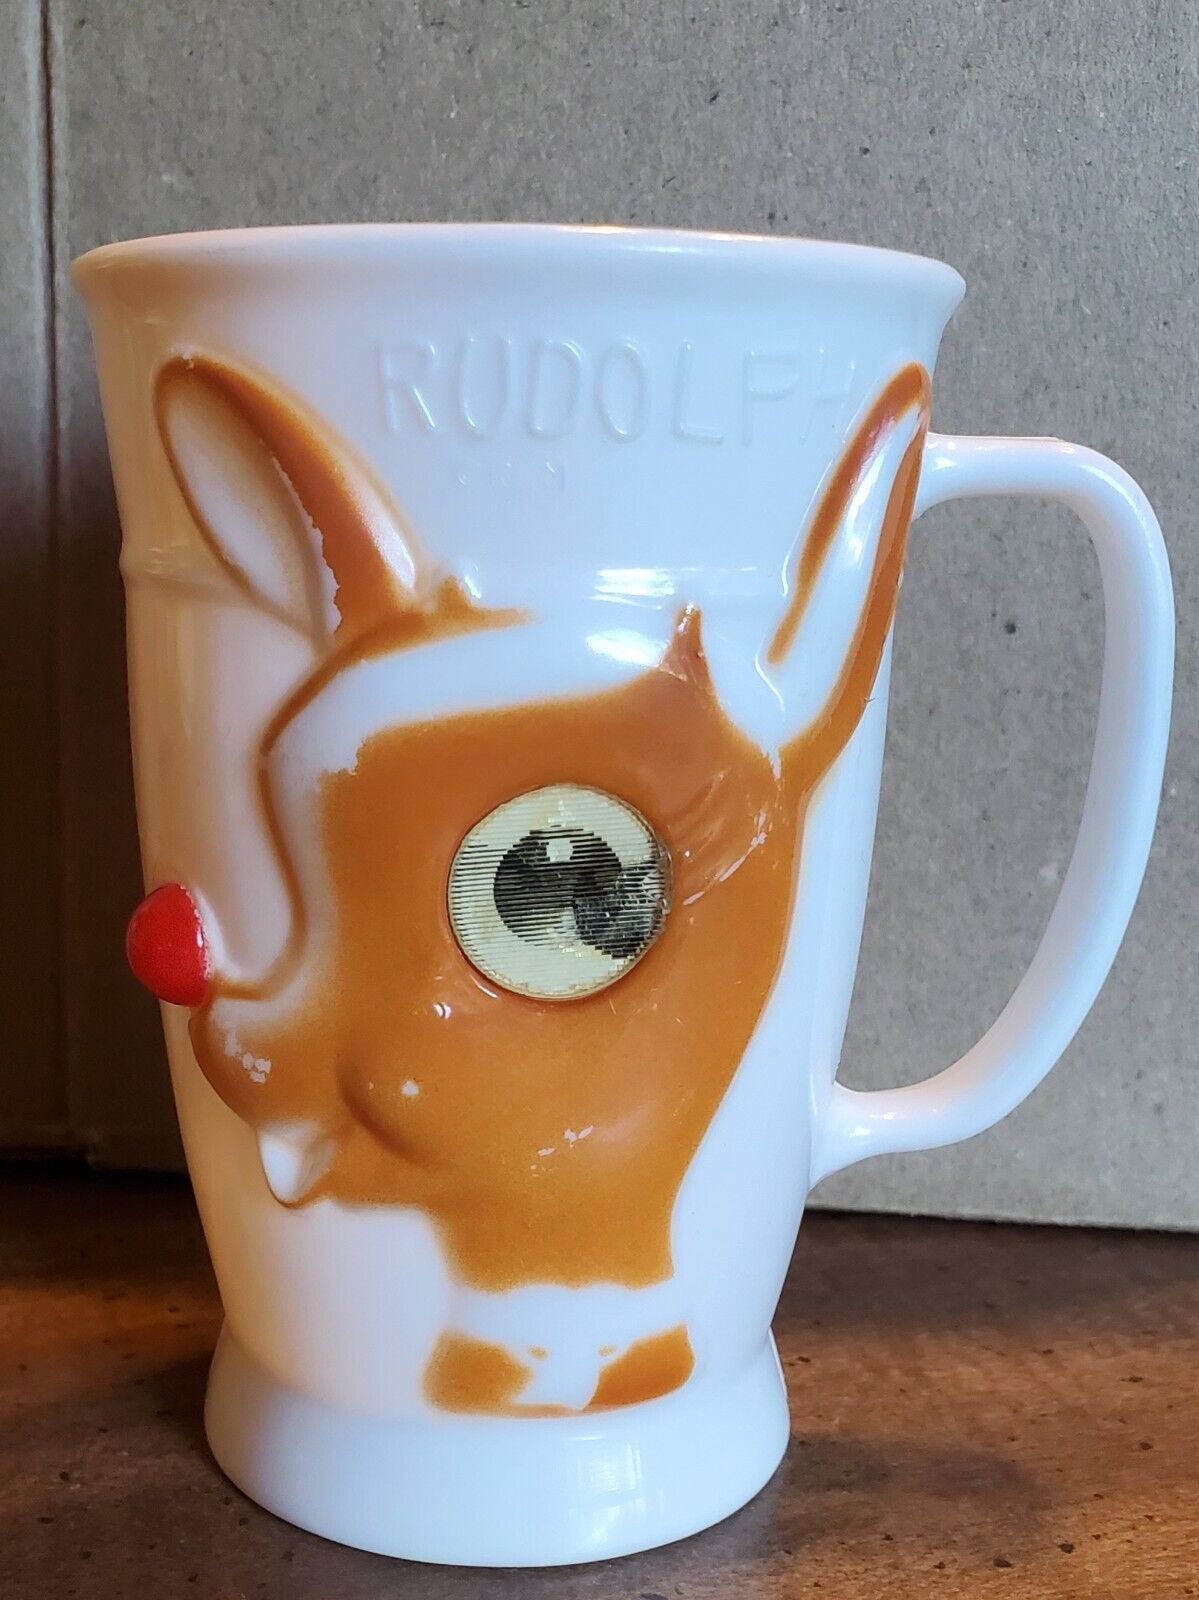 Vintage Rudolph Reindeer 1950s Kids Baby Cup With Holographic Blinking Eye